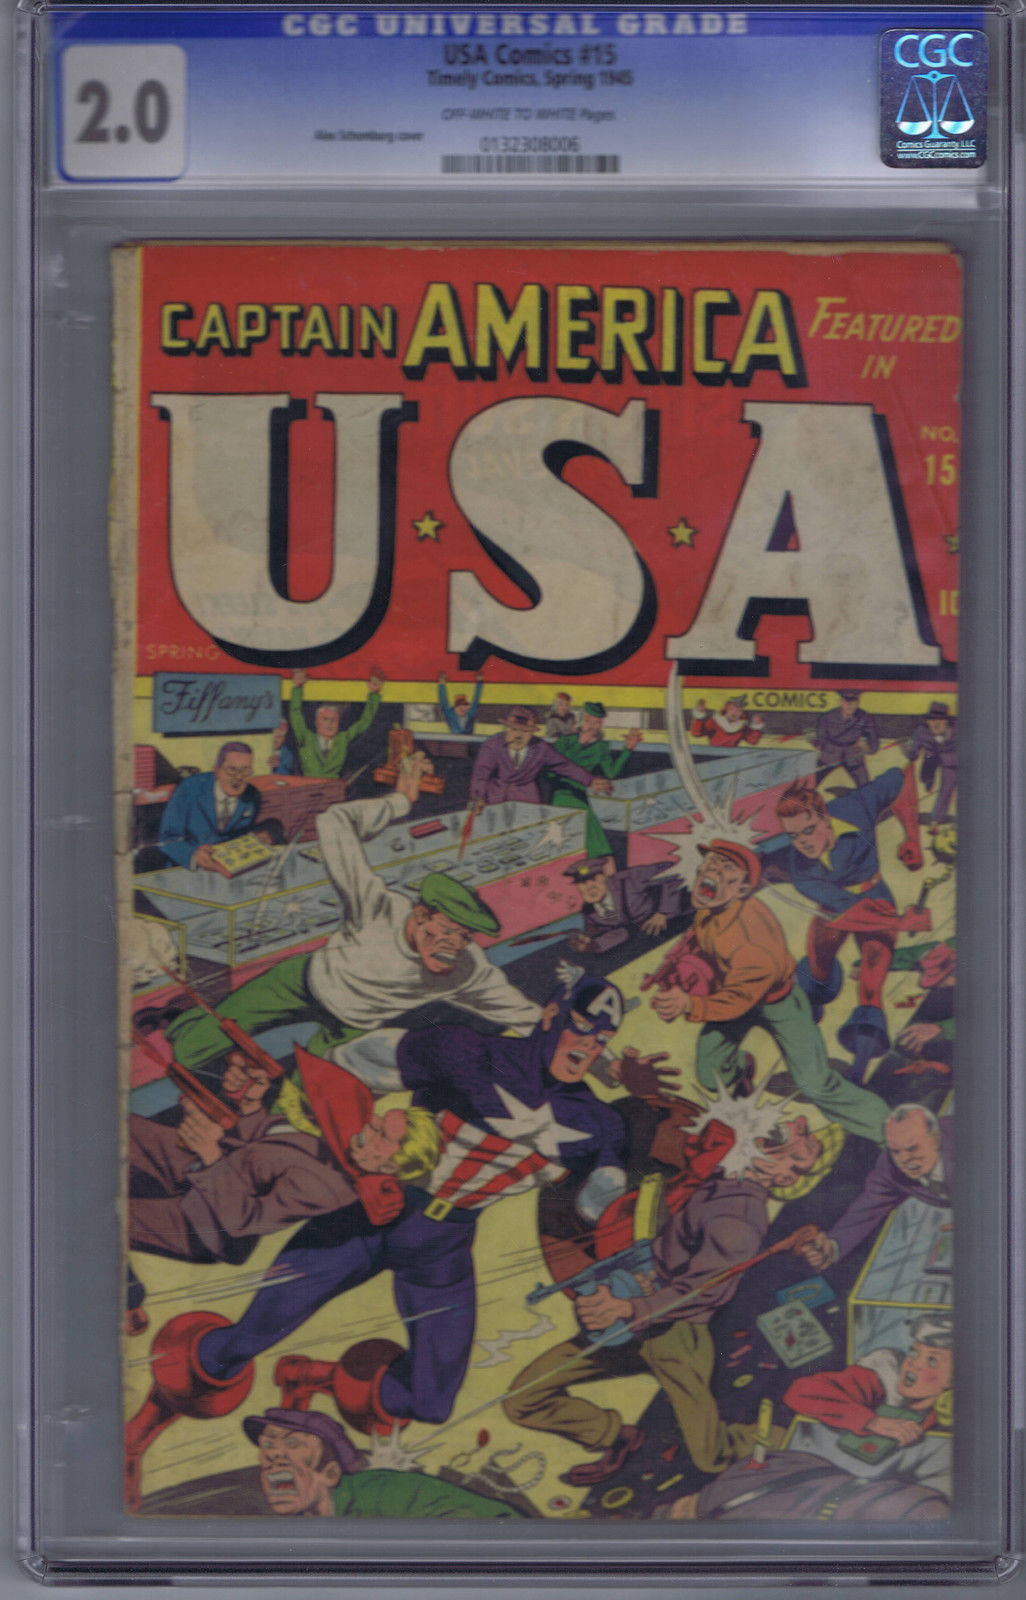 USA Comics #15 Timely1945 CGC 2.0  Schomburg cover!